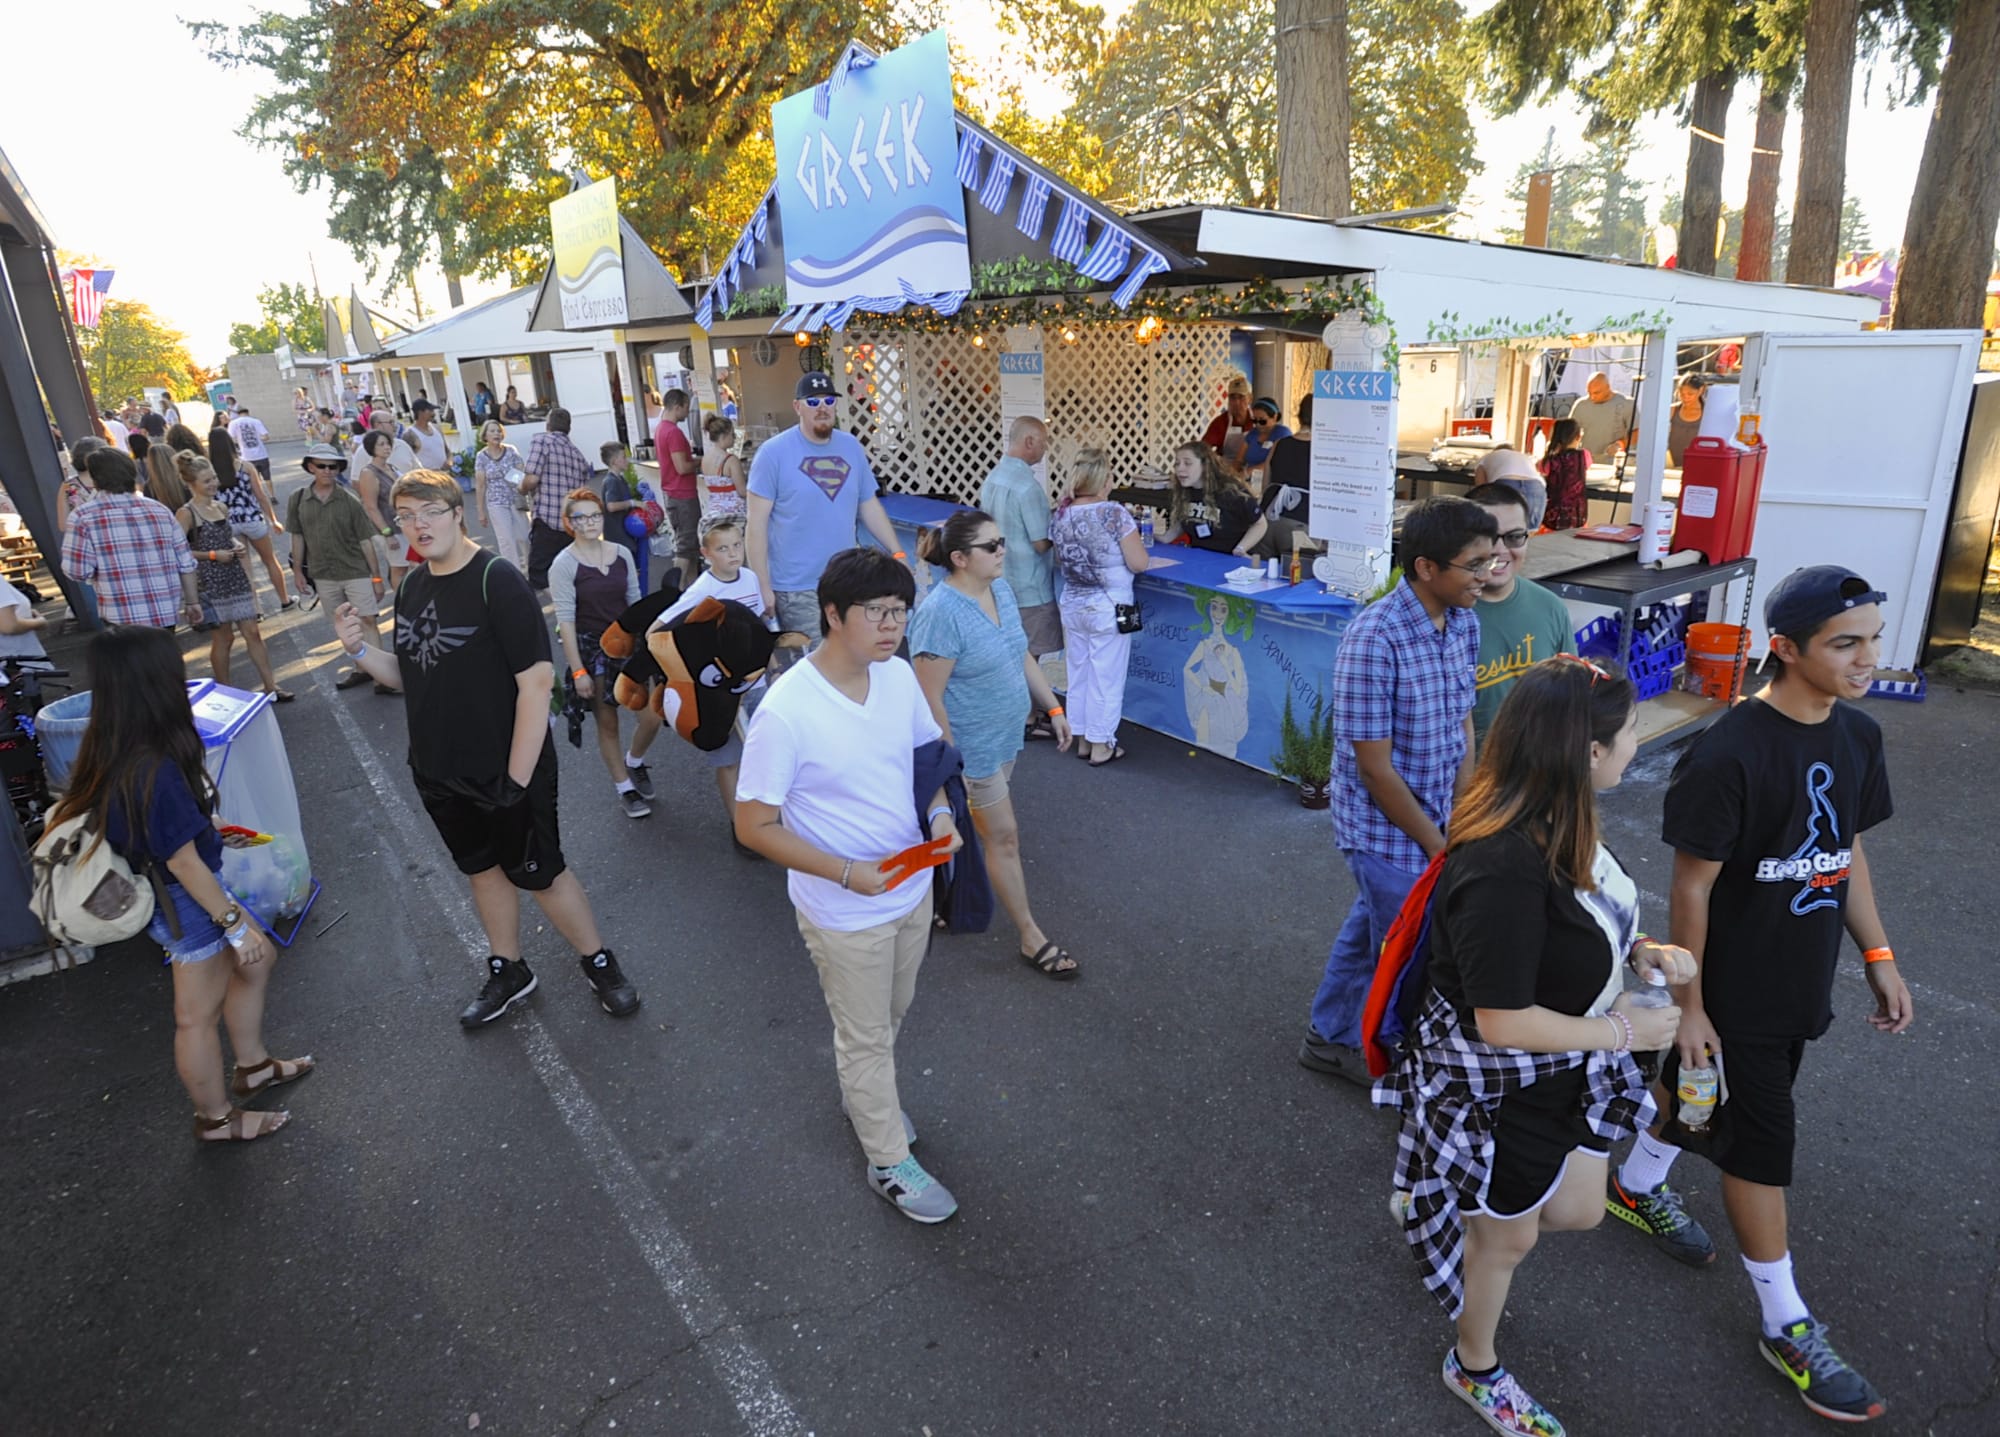 The Greek food stall, one of many, at the International Food Fest at St Joseph Catholic School in Vancouver, Wa., Saturday Sept 12, 2015.